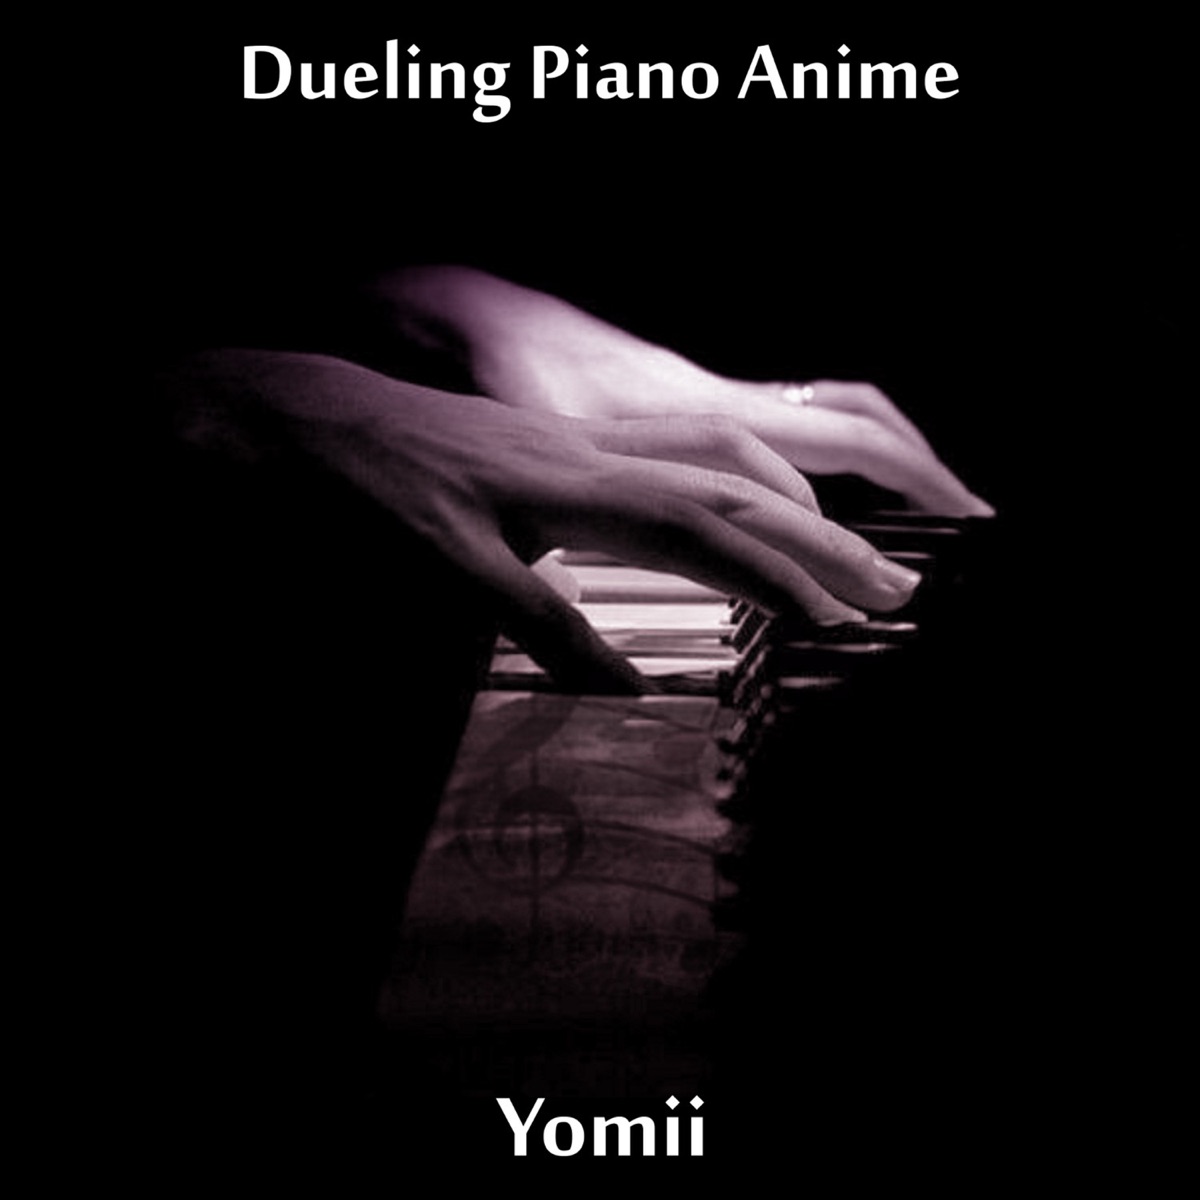 Discover more than 70 anime piano gif - awesomeenglish.edu.vn